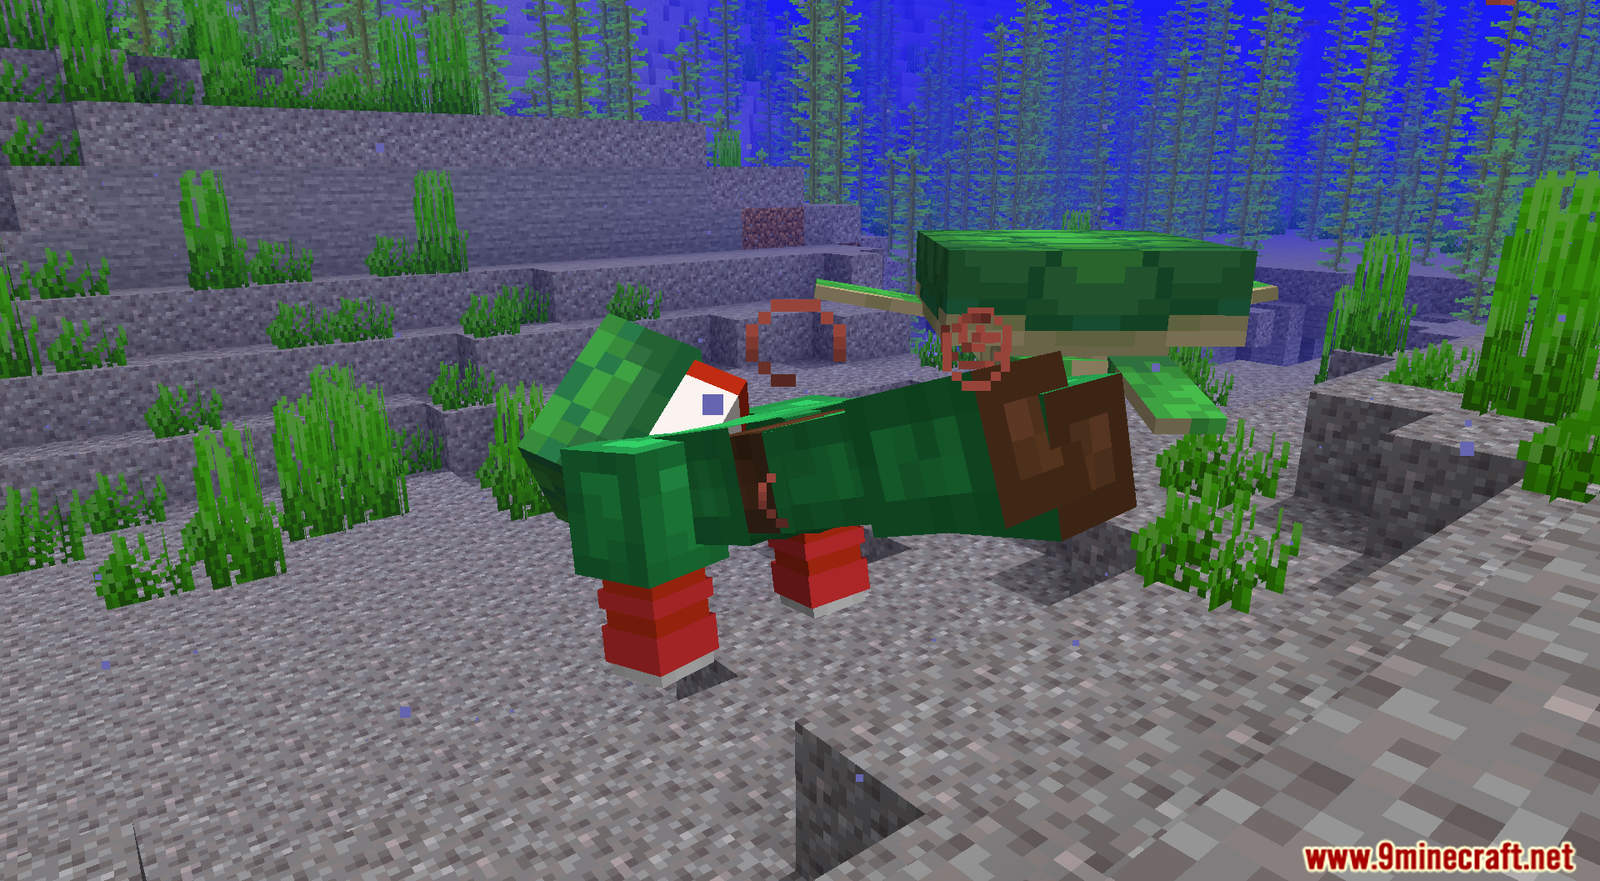 Full Turtle Armor Data Pack (1.18.2, 1.13.2) - Becomes a Turtle 5